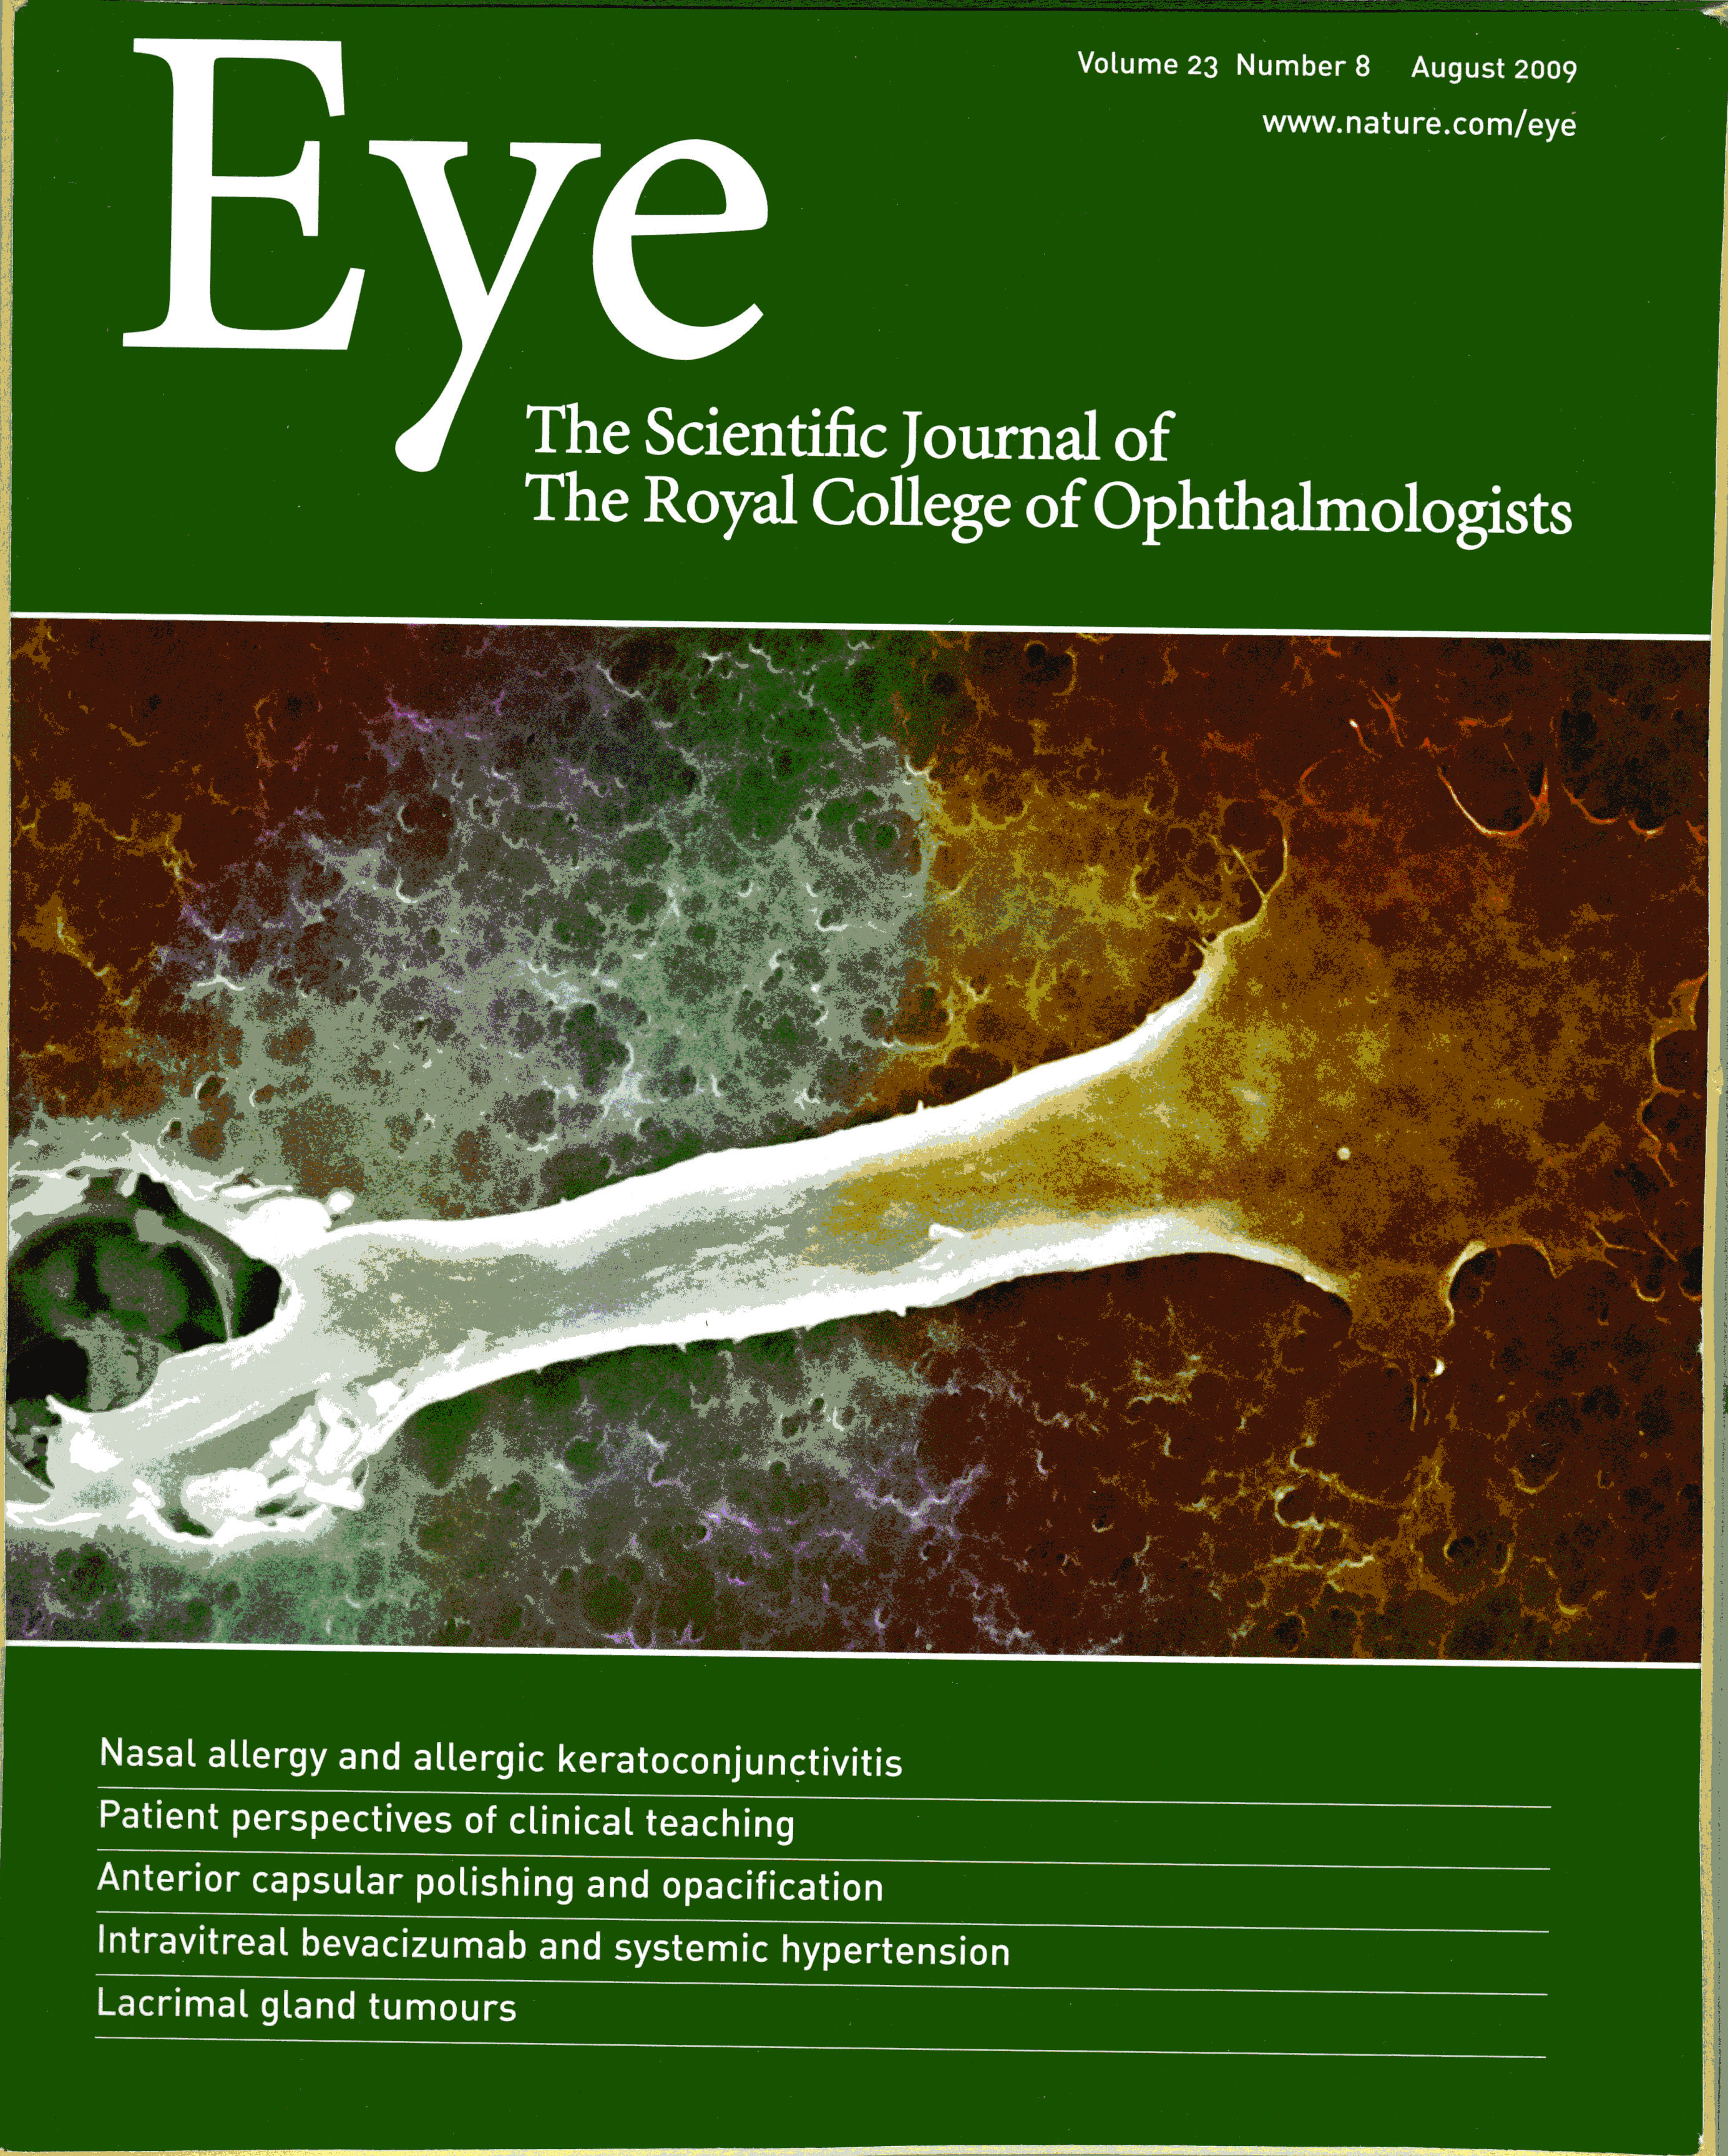 EYE: The Scientific Journal of The Royal College of Ophthamologists